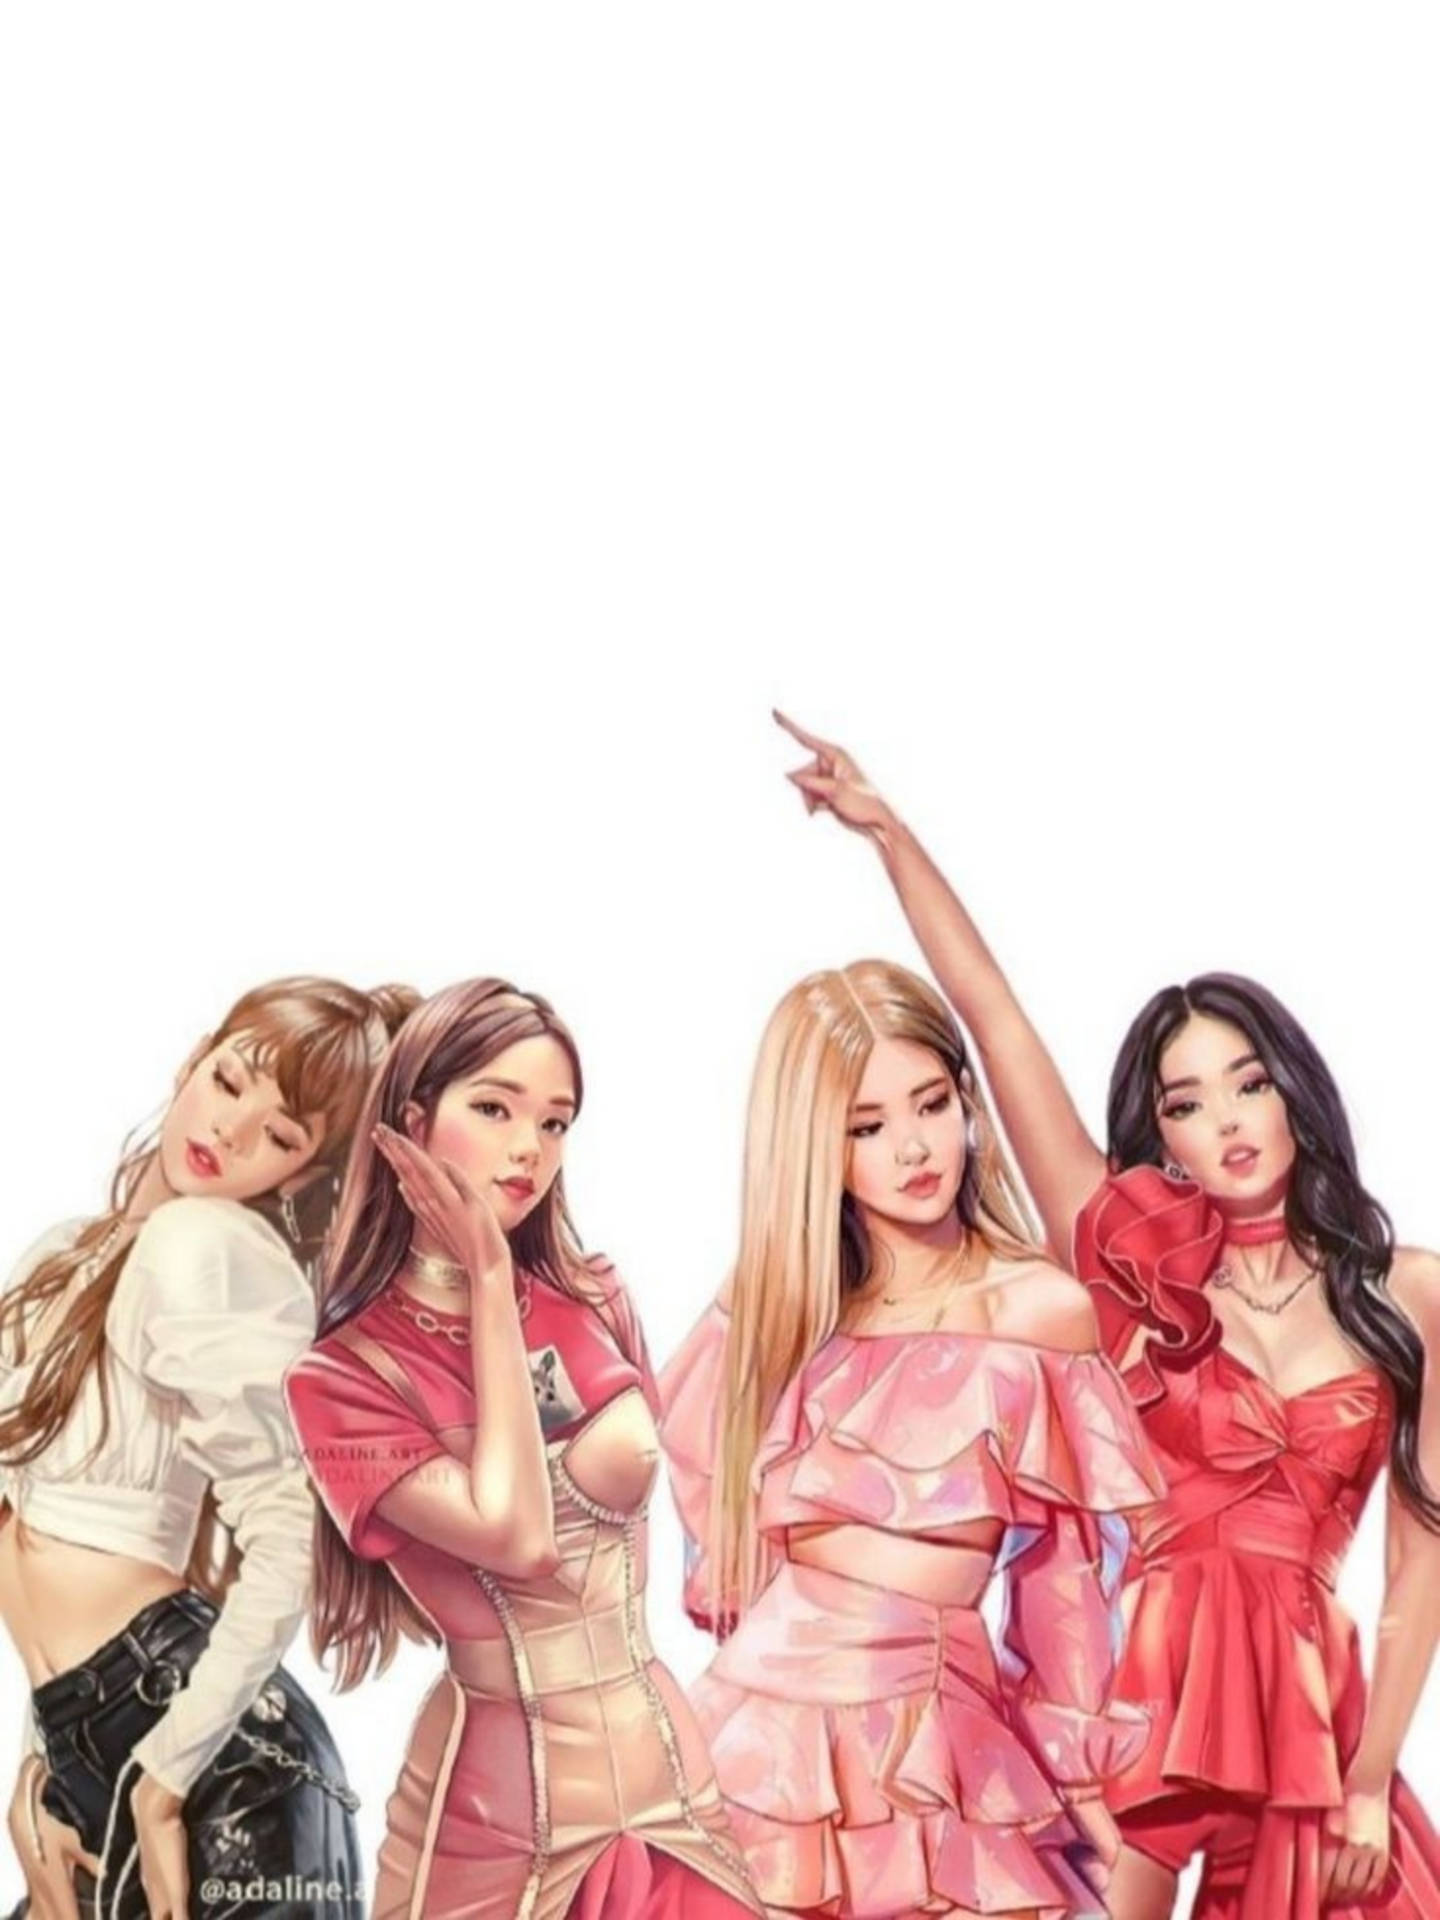 Blackpink Cartoon In Sexy Outfits Background